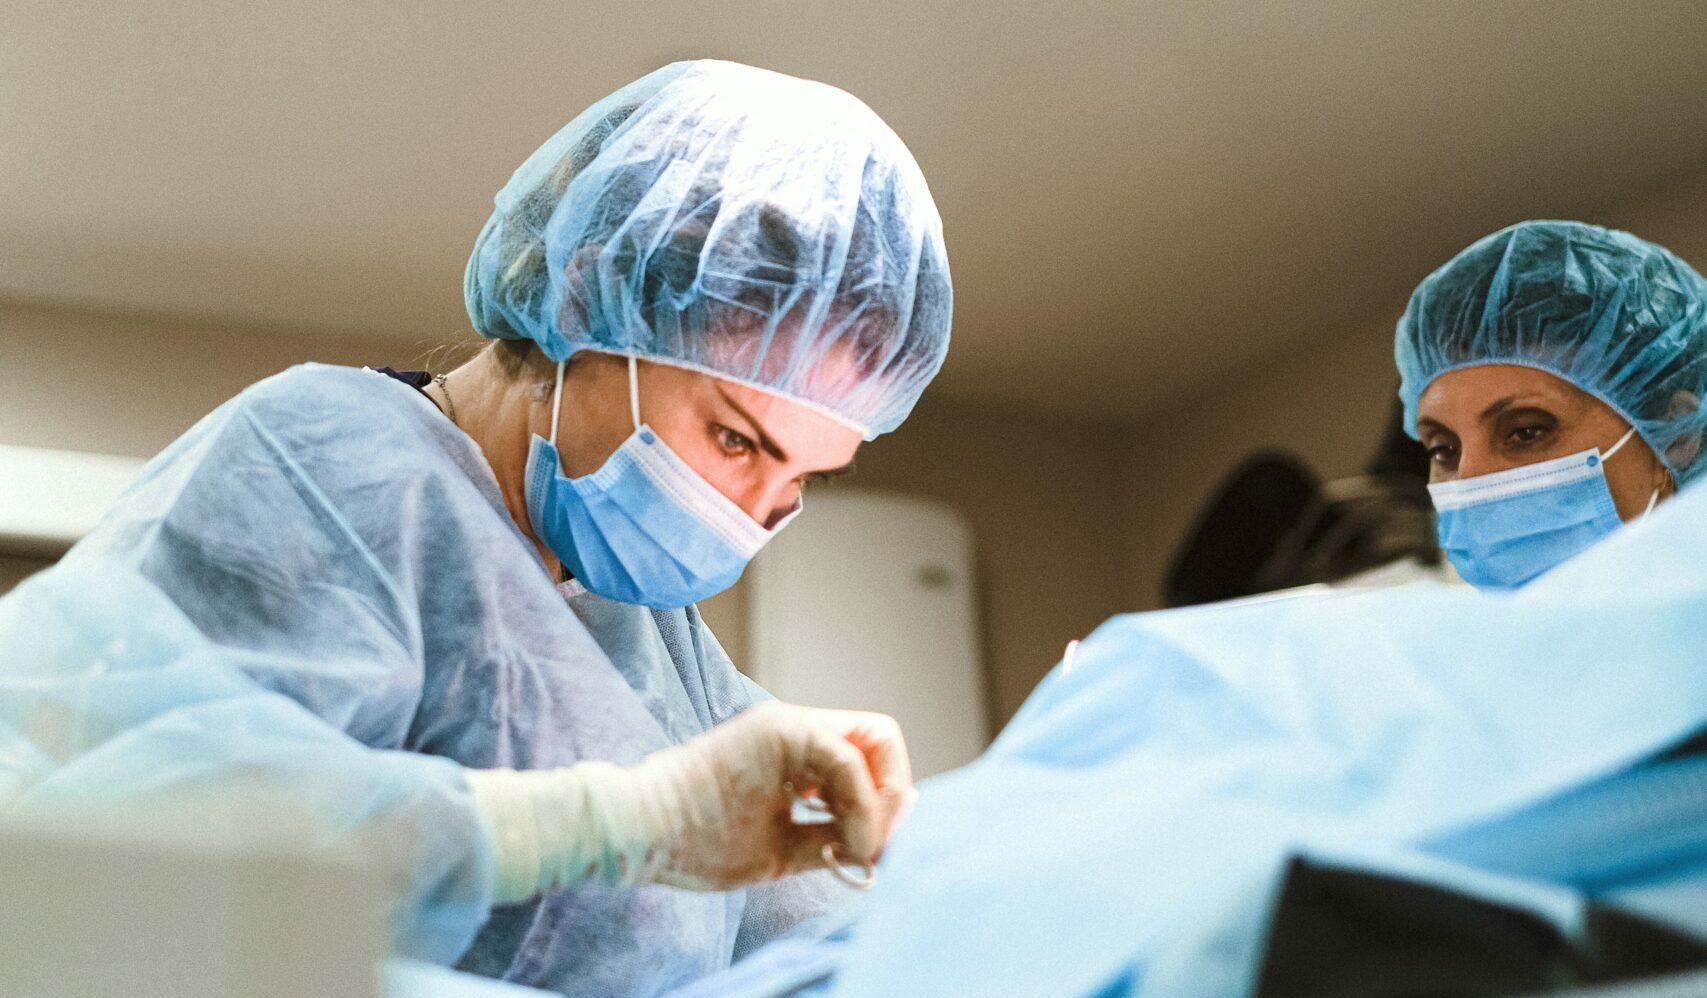 a surgeon operates on a patient with trust